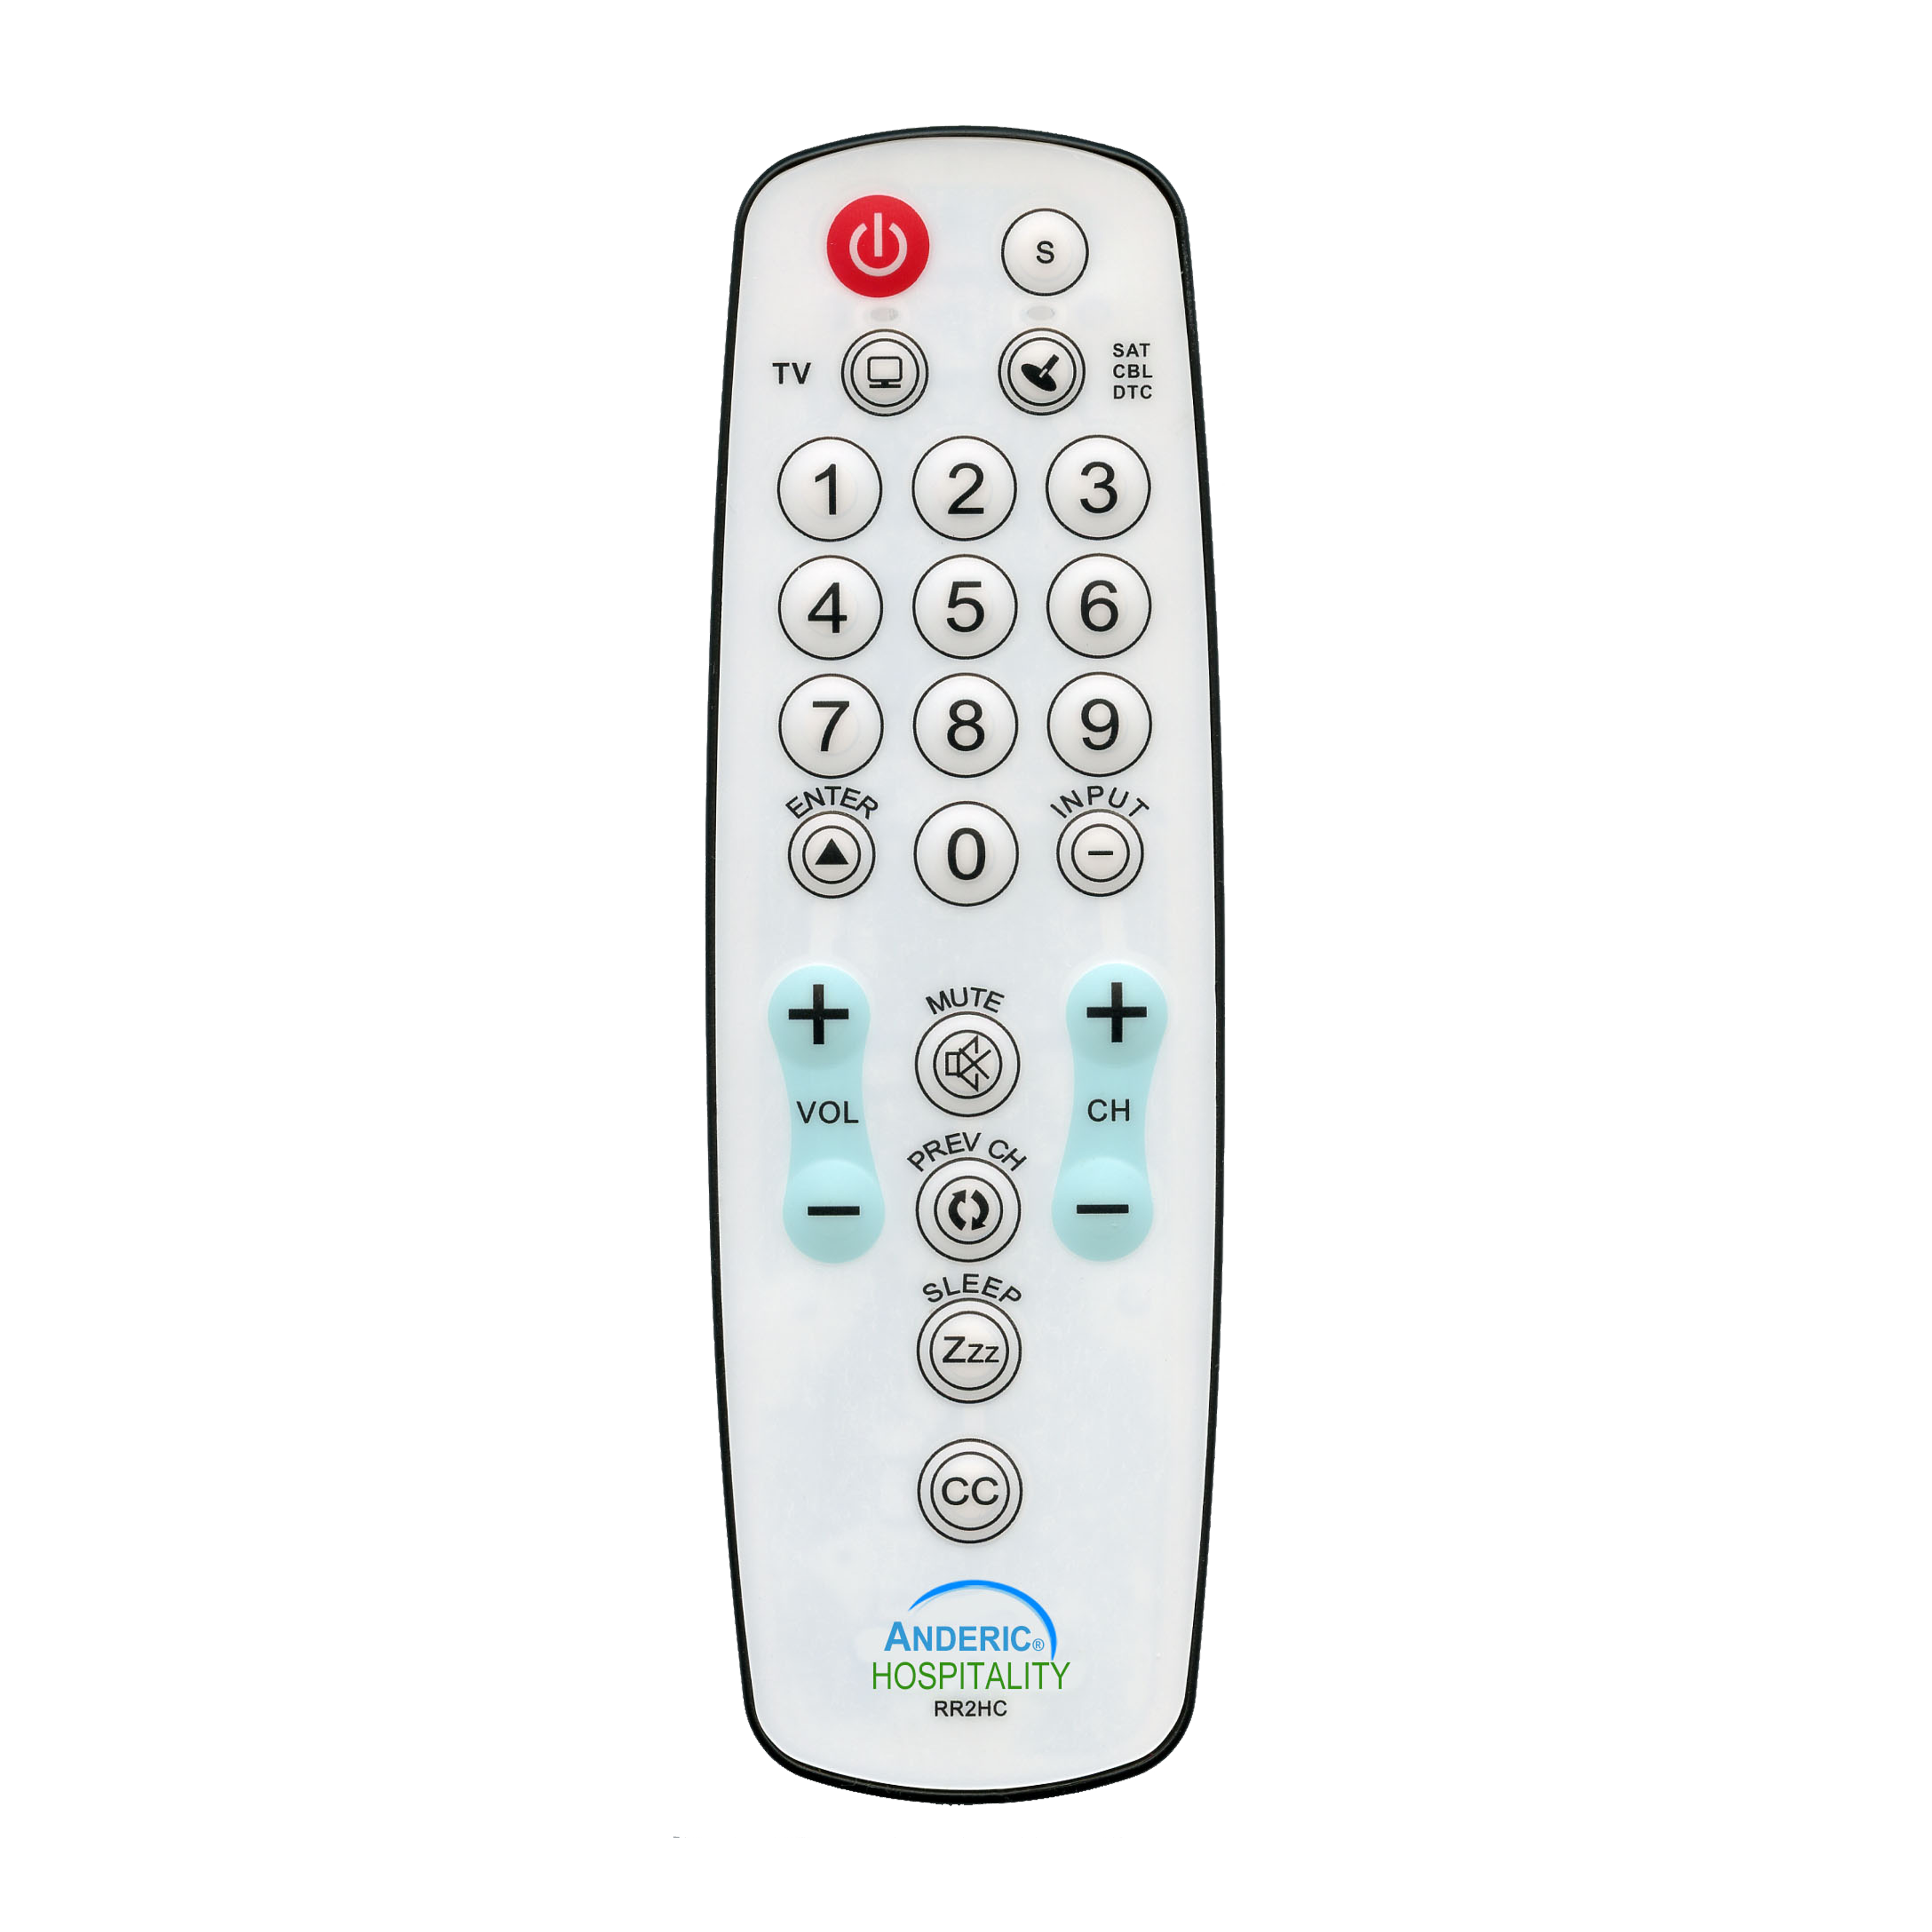 RR2HC 2-Device EzWipe Universal Remote Control for Hospitality TVs & In-Room Cable Boxes